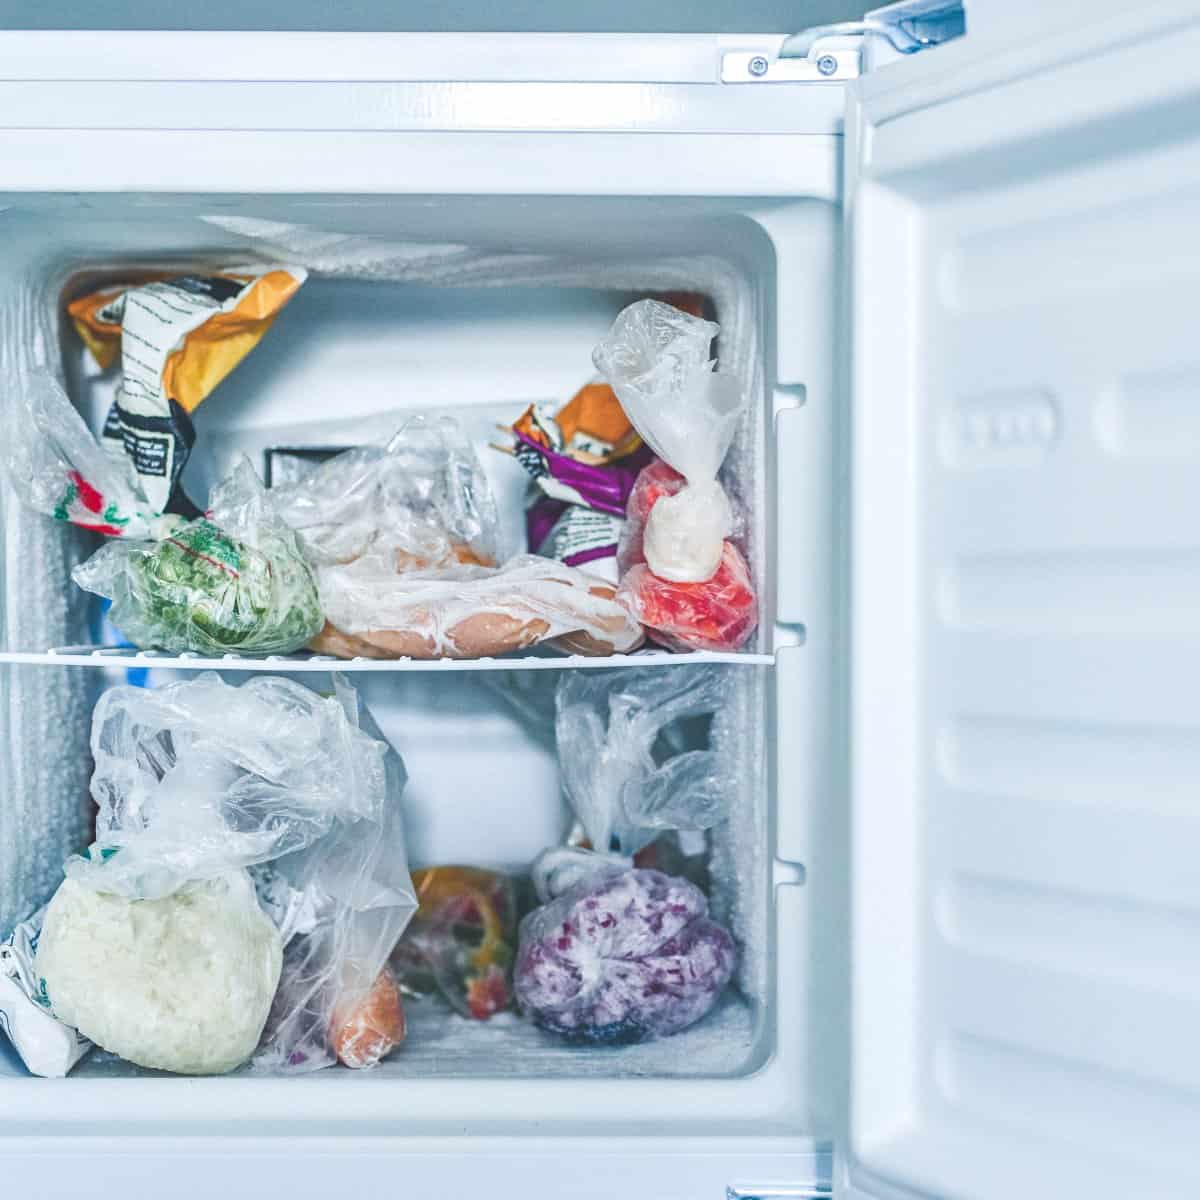 What does freezing do to food